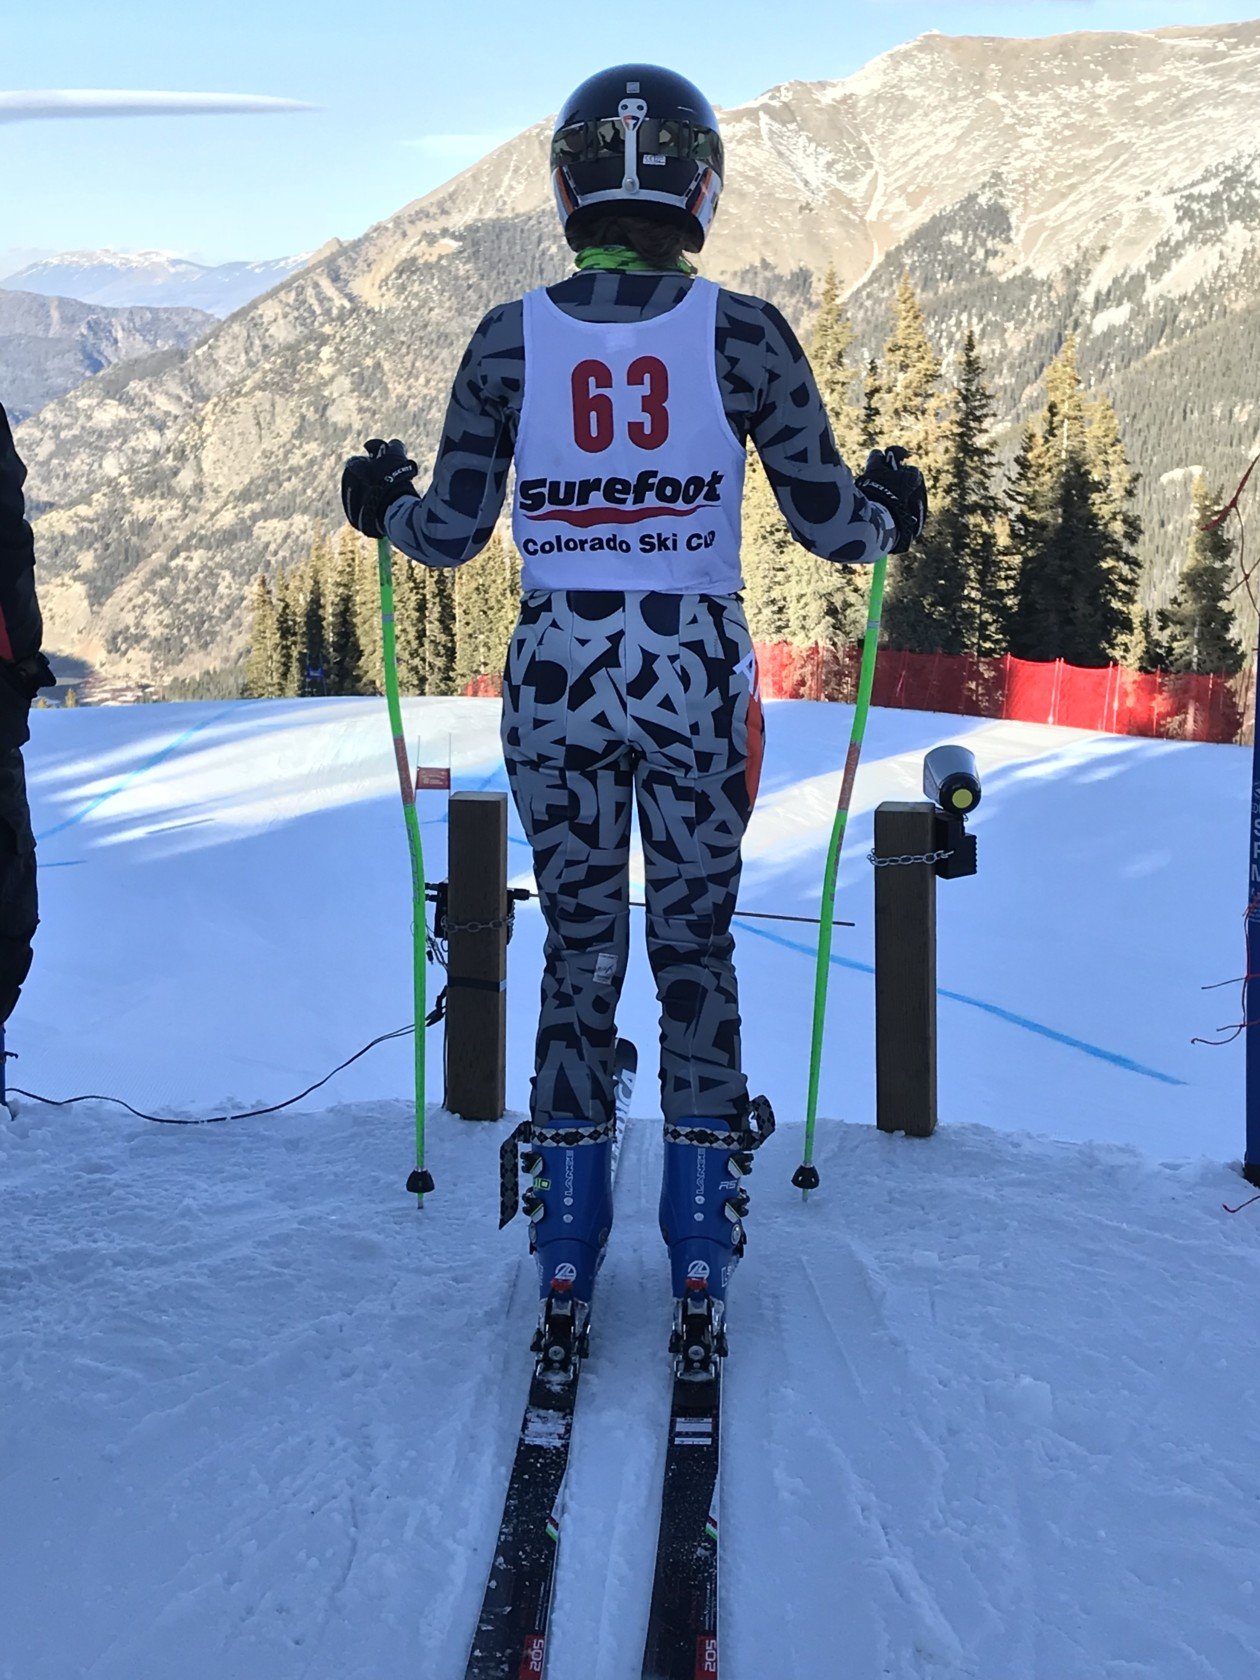 Of course, not all ski racing suits for girls are bright and colorful. The Arctica Alpha GS Speed Suit in asphalt is equally popular for girls and boys.